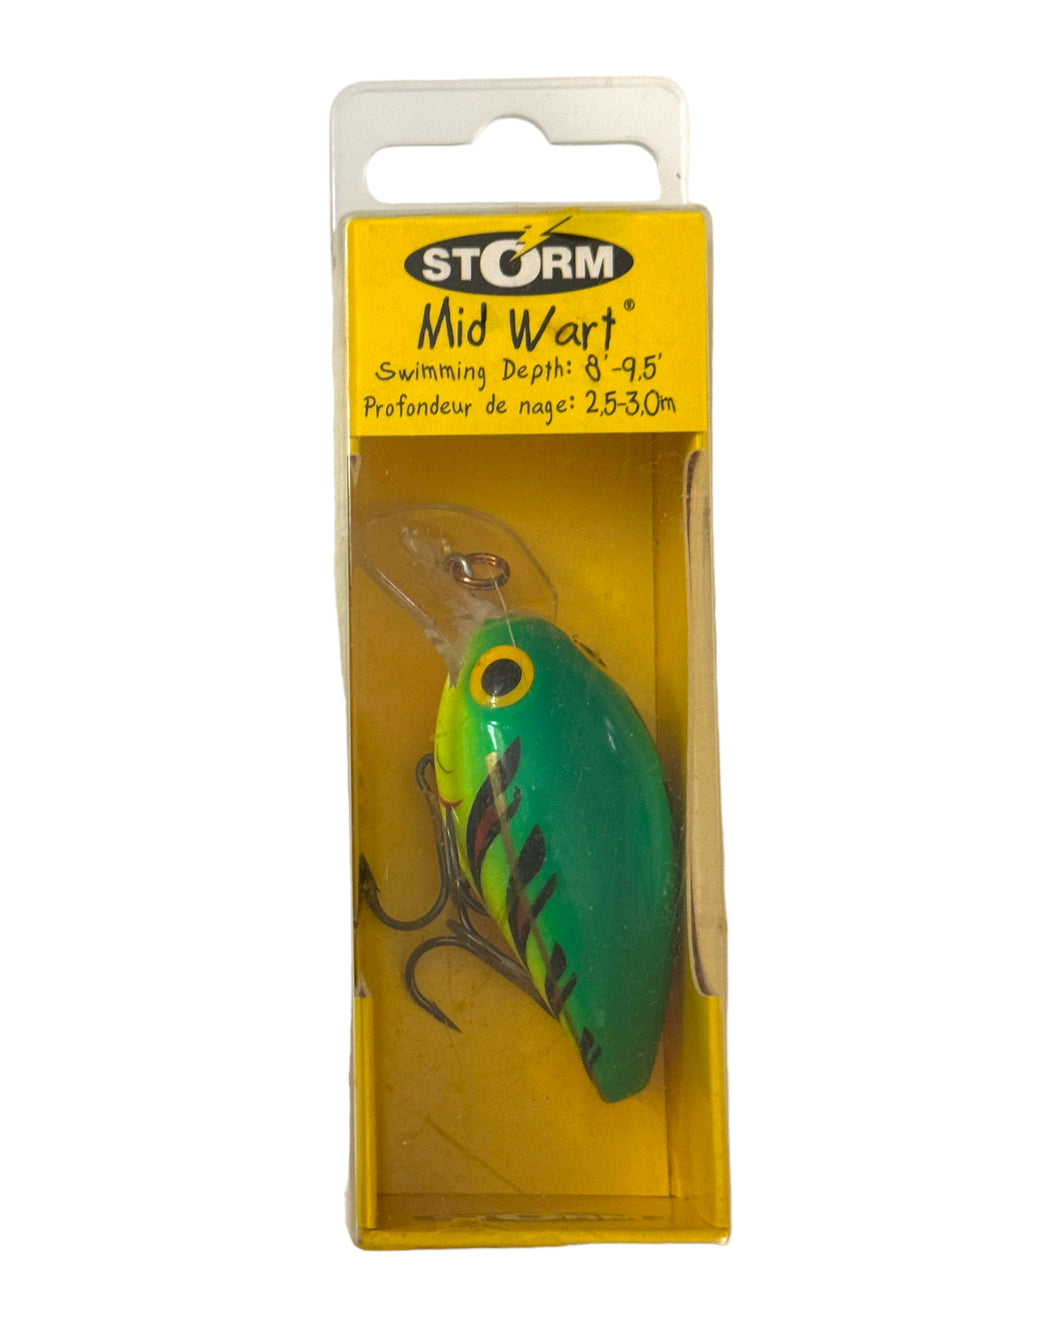 STORM LURES MID WART Size 5 Fishing Lure • MW05 HOT TIGER – Toad